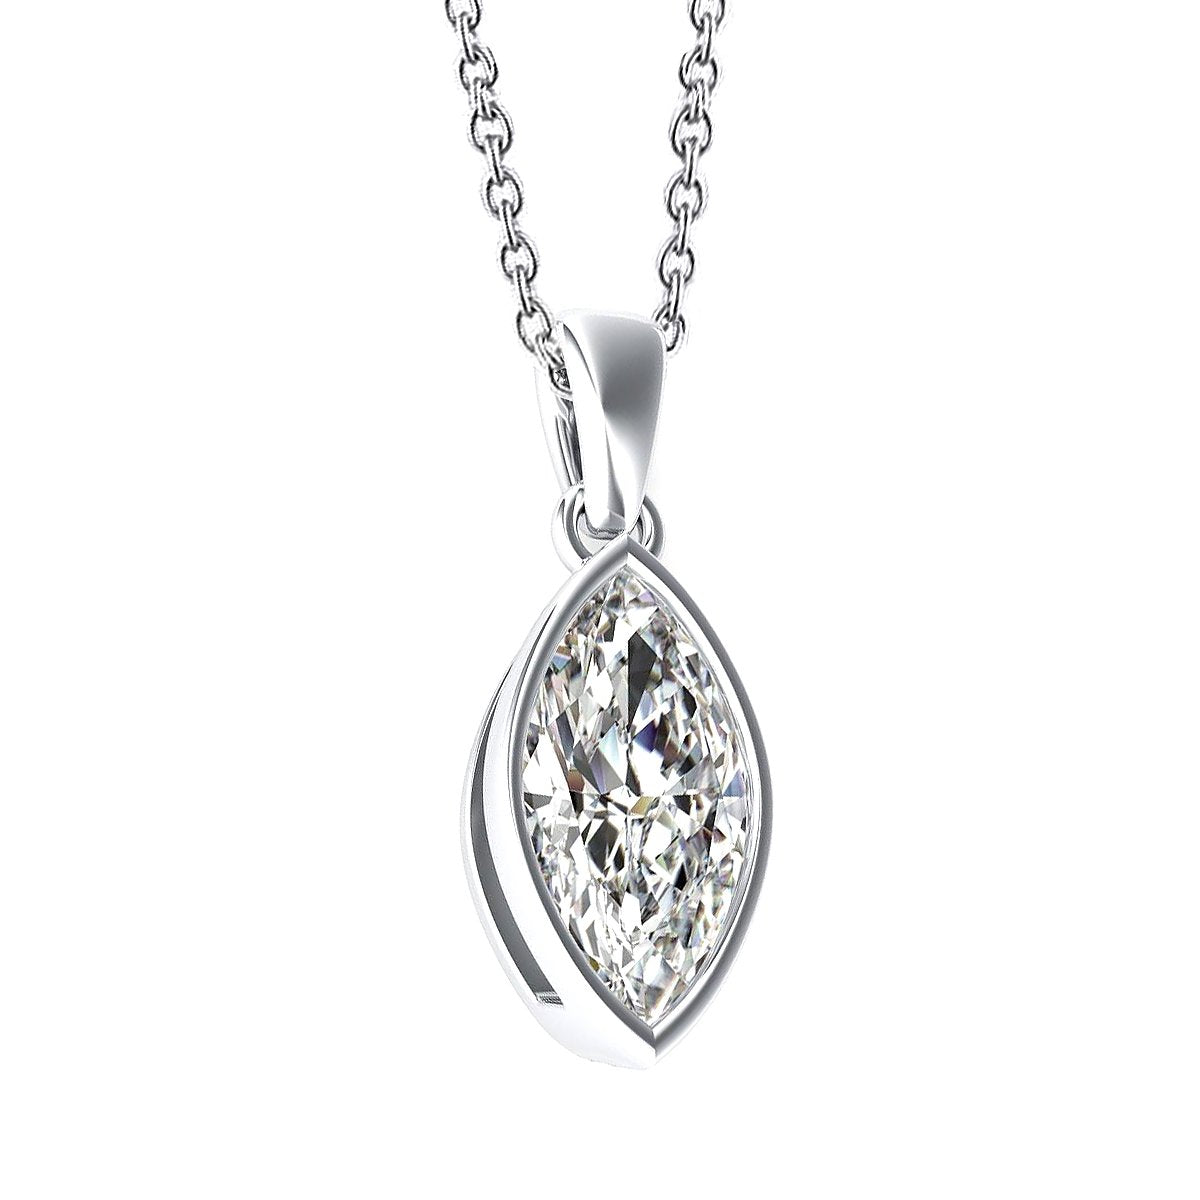 1.5 Carats Solitaire Diamant Taille Marquise Pendentif Or Blanc 14K - HarryChadEnt.FR